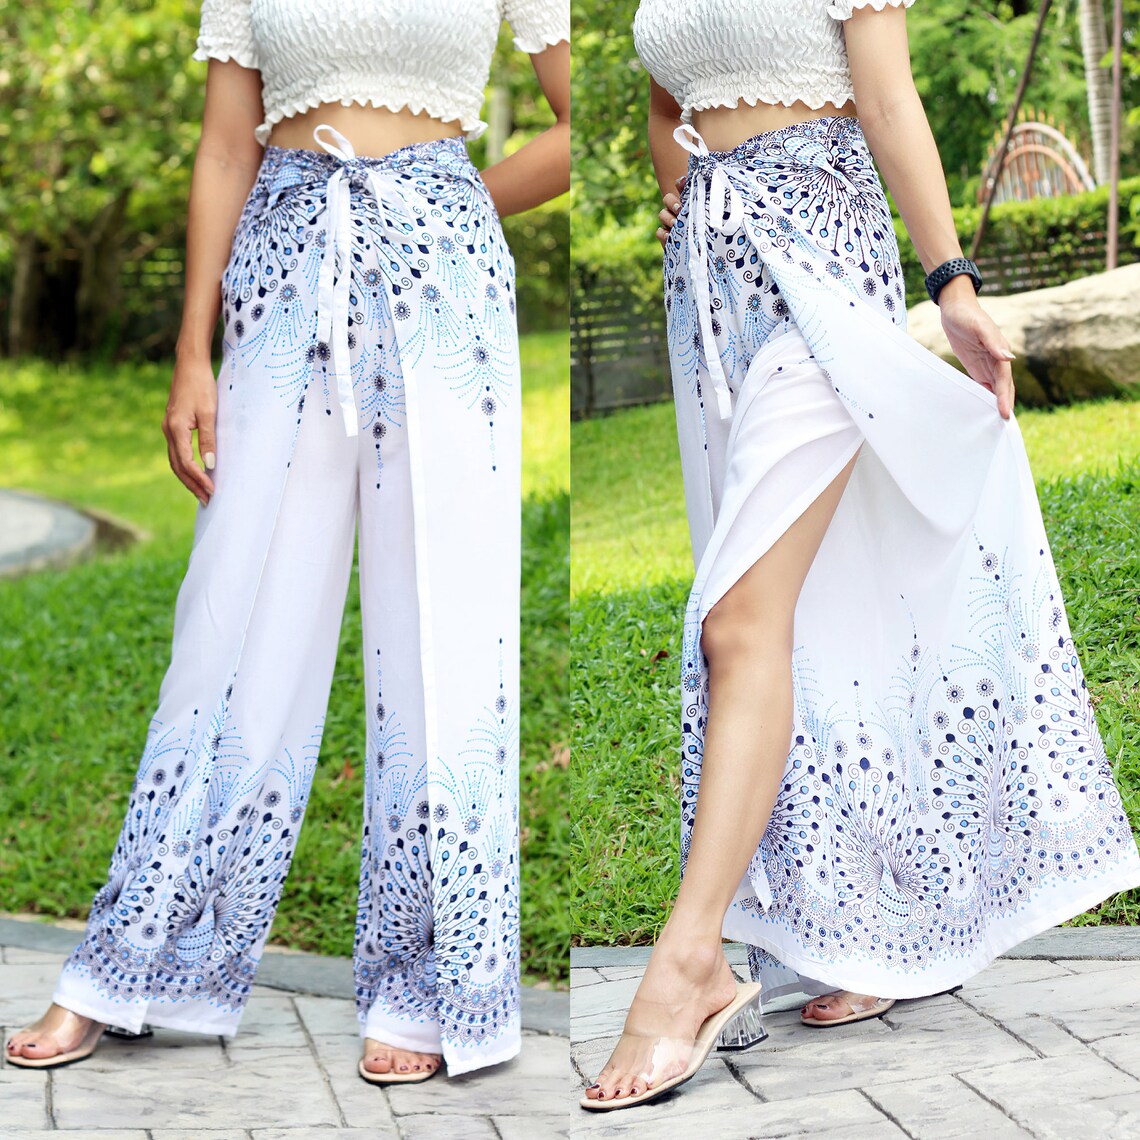 Elegant white boho wrap pants featuring a unique peacock print, perfect for a stylish and relaxed look.